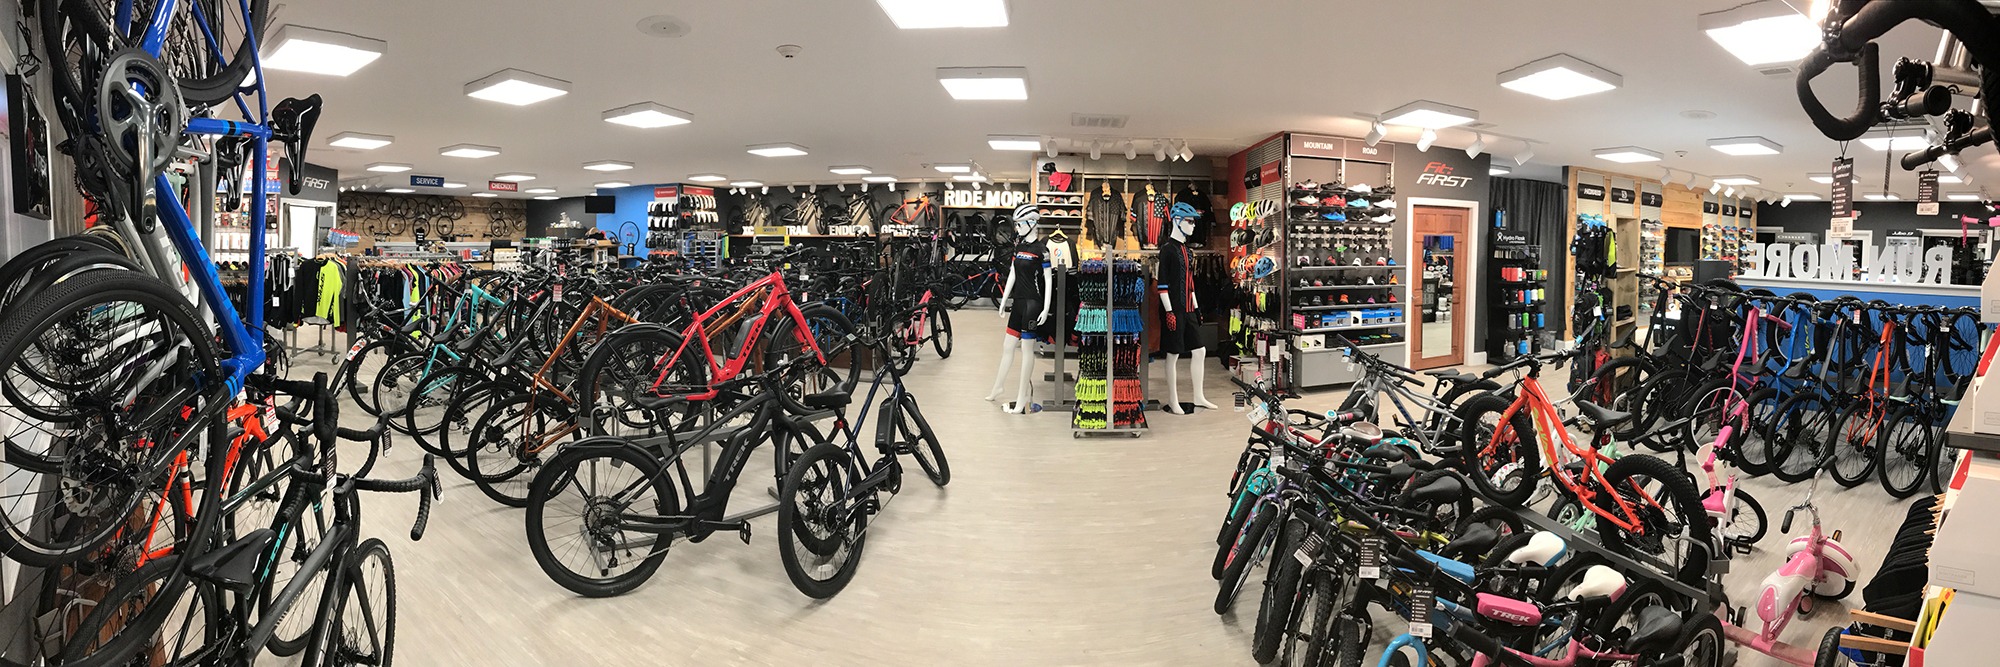 sports cycle store near me